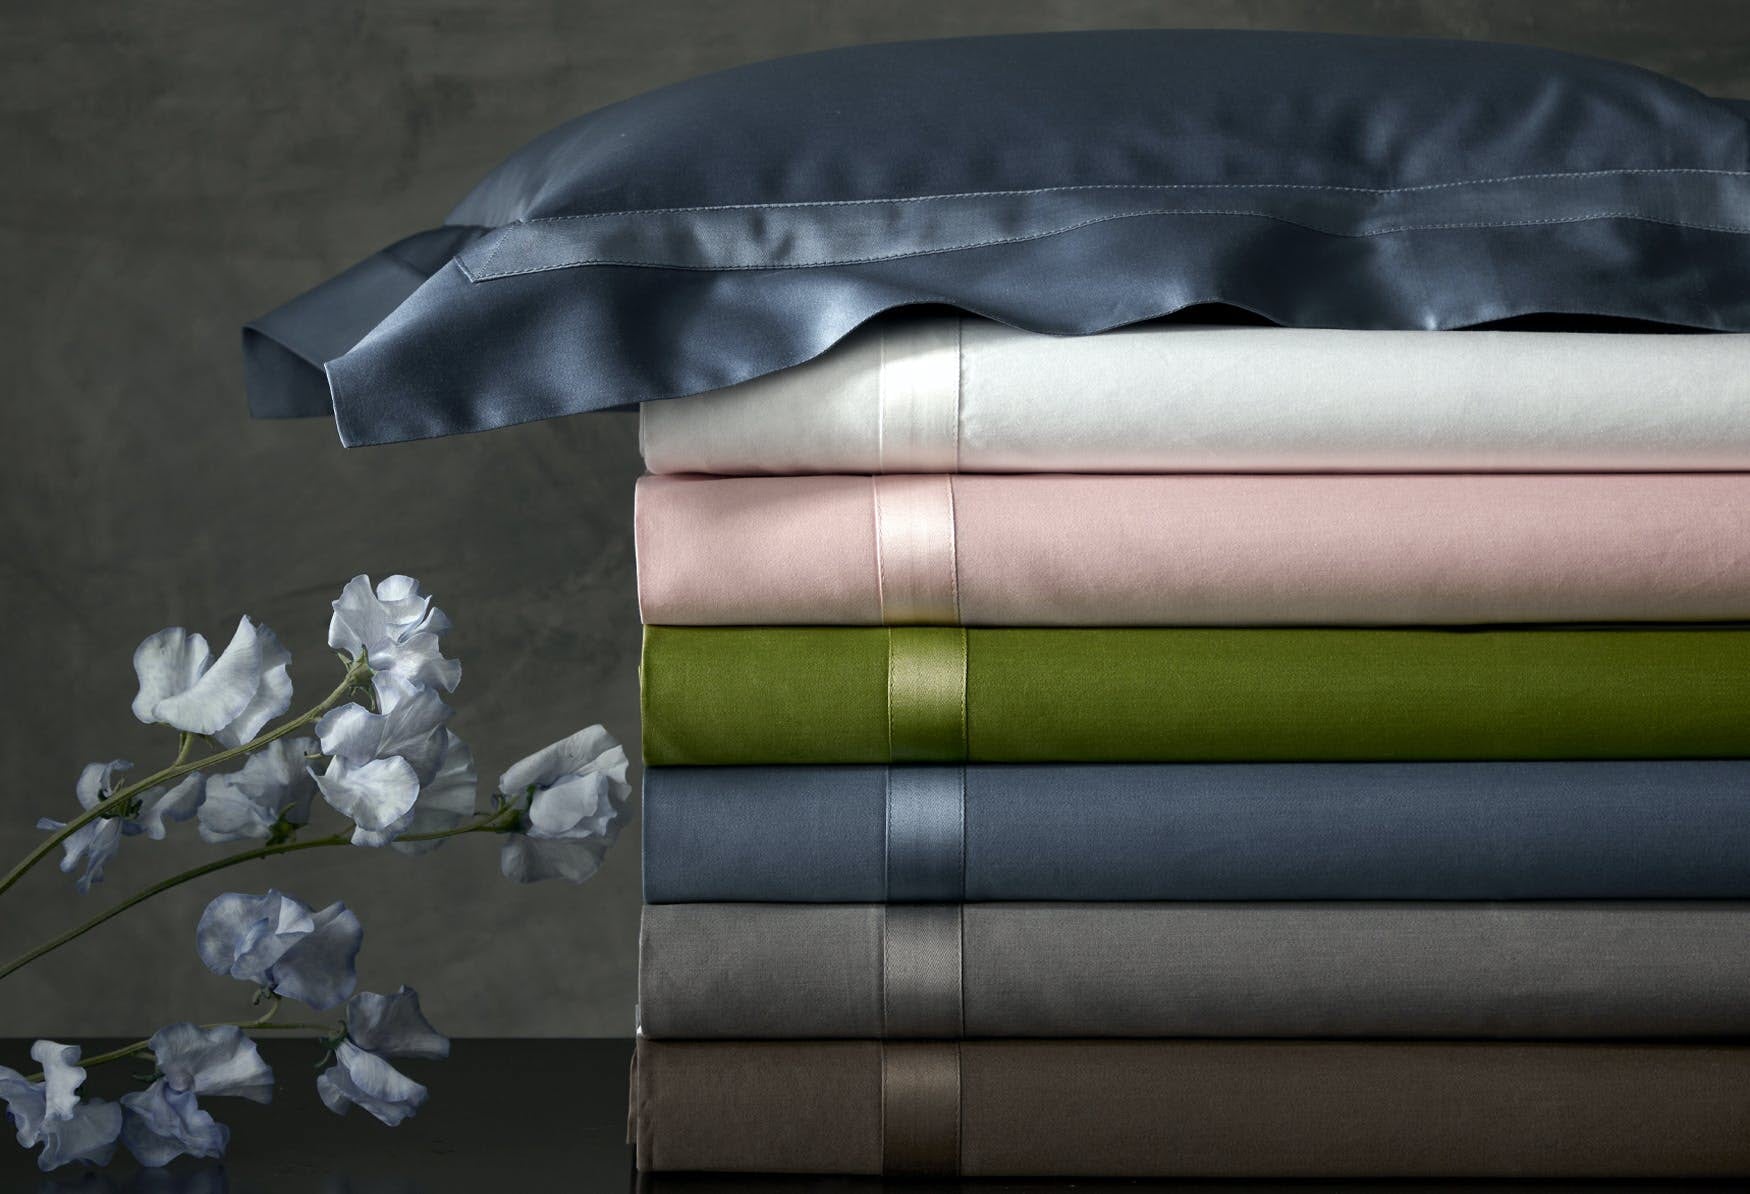 The Ultimate Guide to Washing Sateen Sheets for the First Time, by  homedesignidea